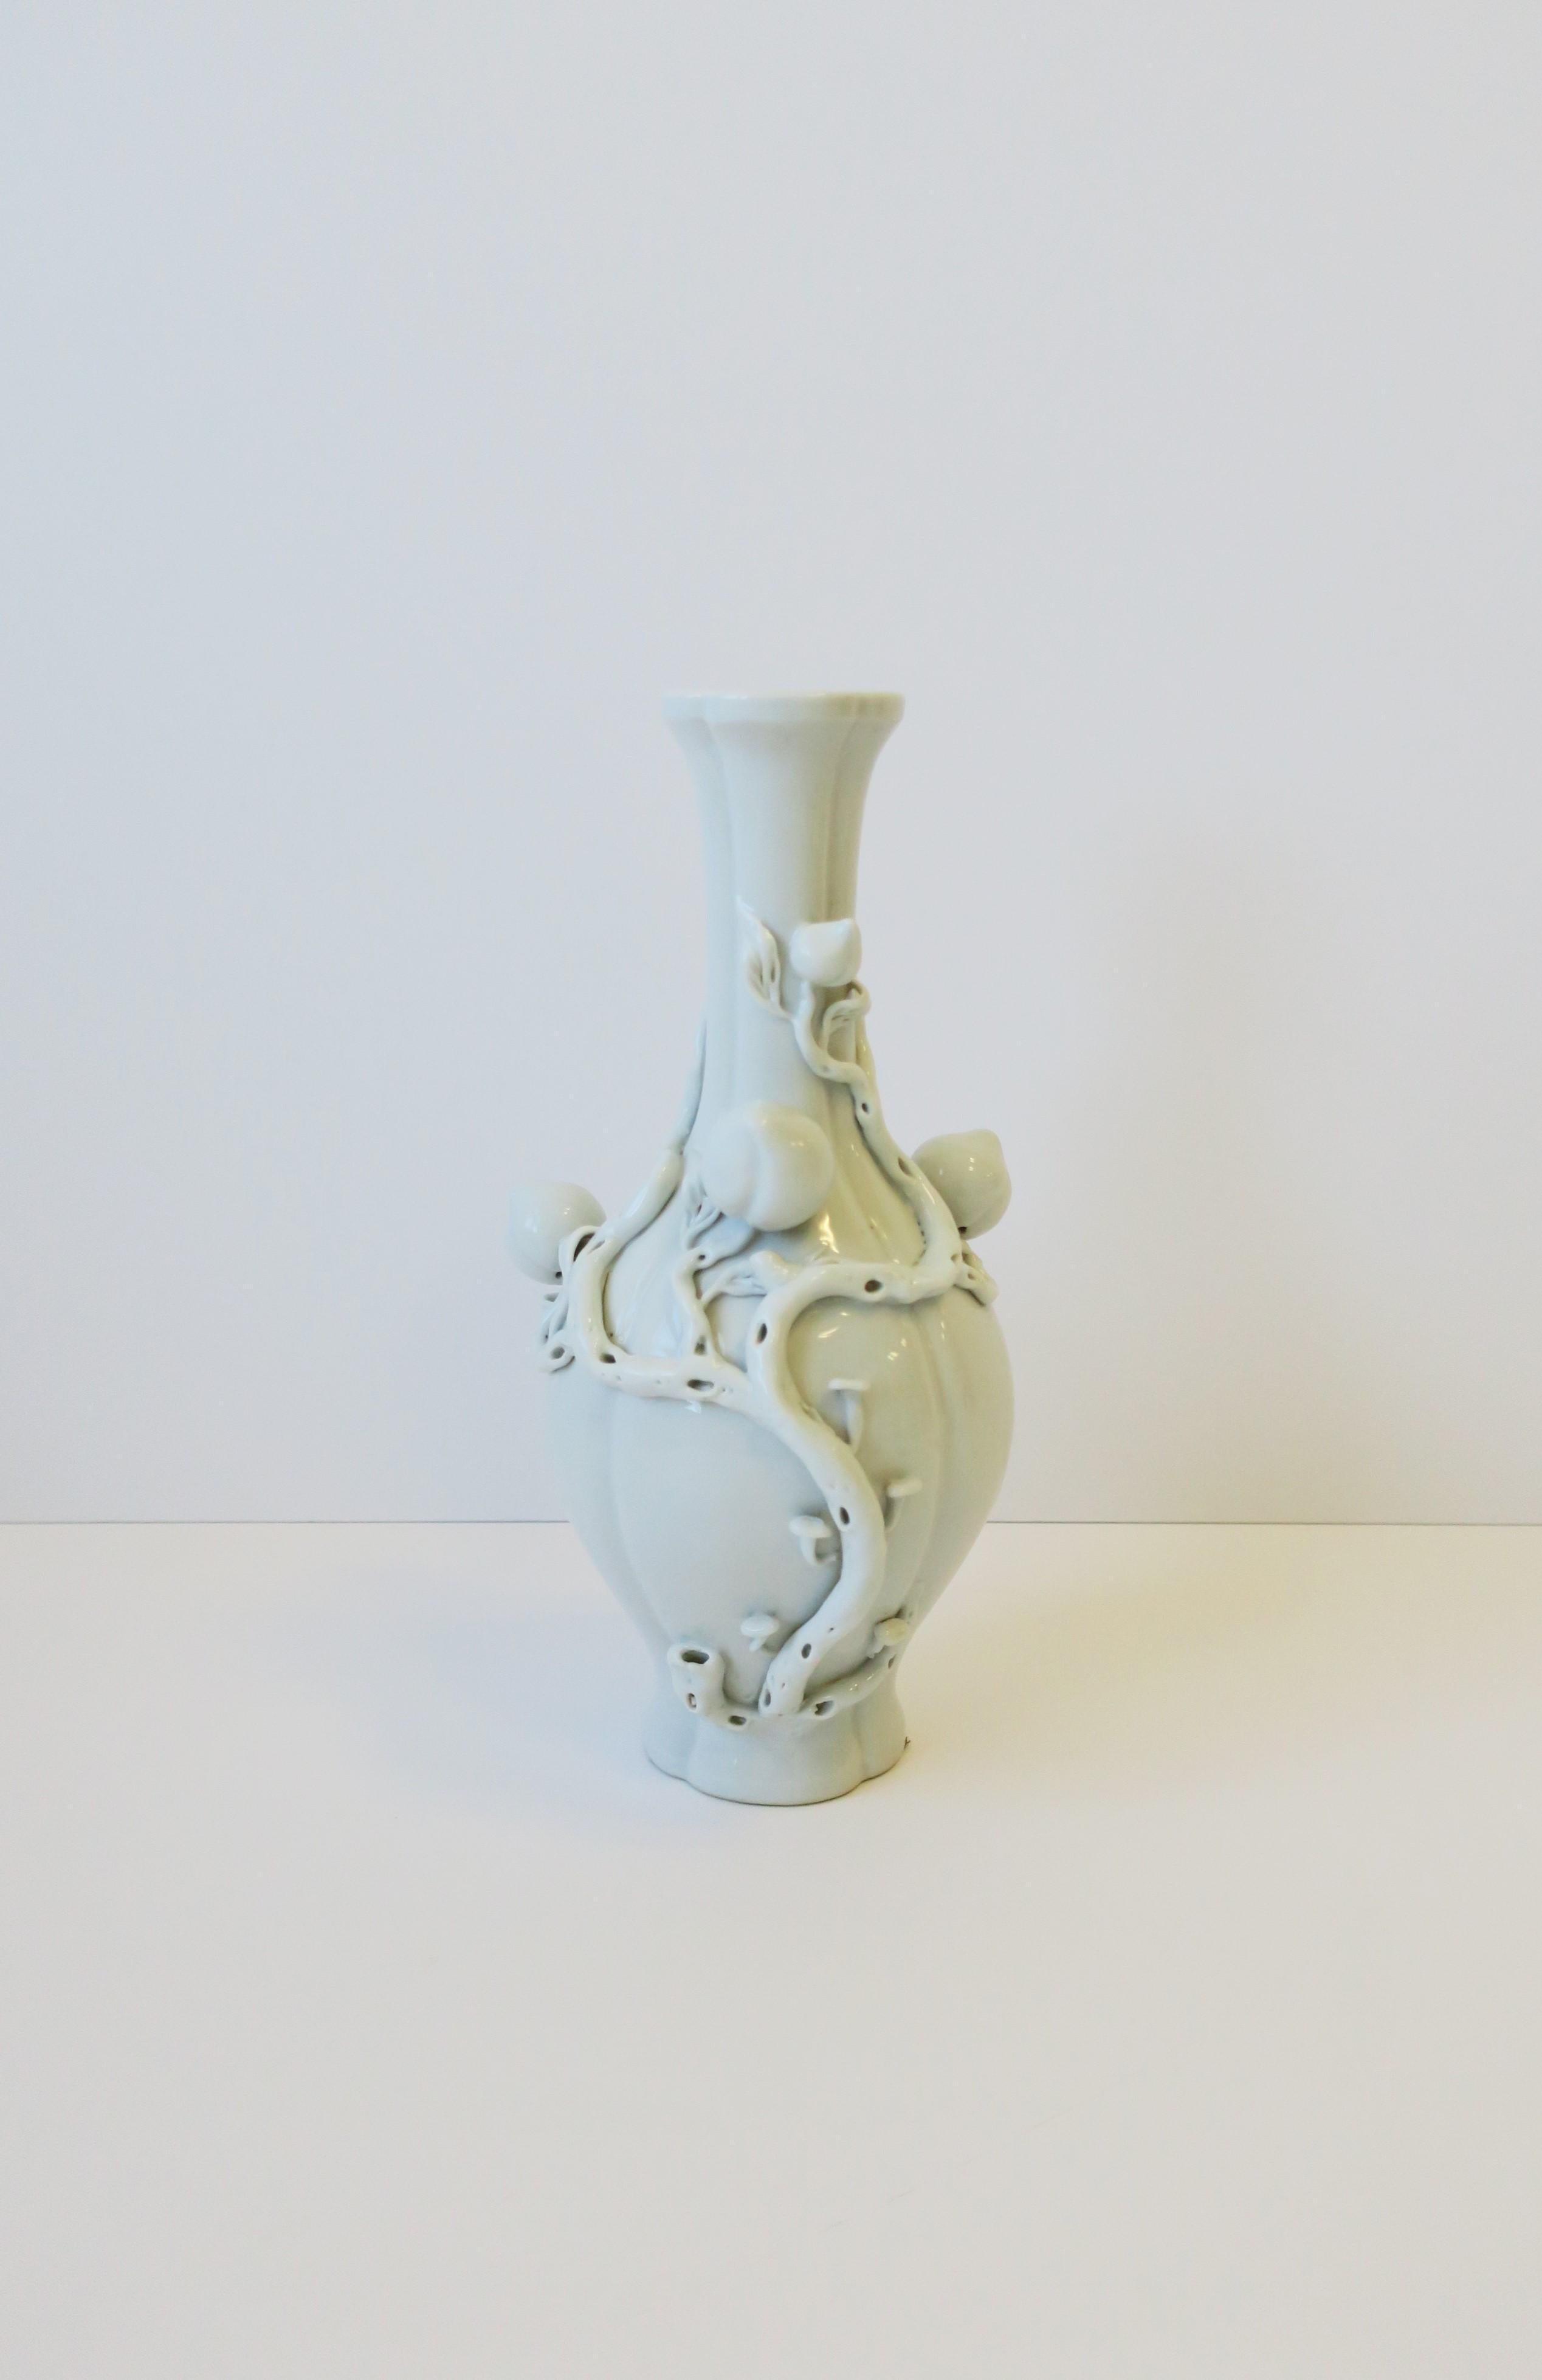 A beautiful Blanc de Chine white ceramic porcelain vase with a generous relief of fruit (peaches), leaves and vines, circa 20th century, China. Dimensions: 6.5